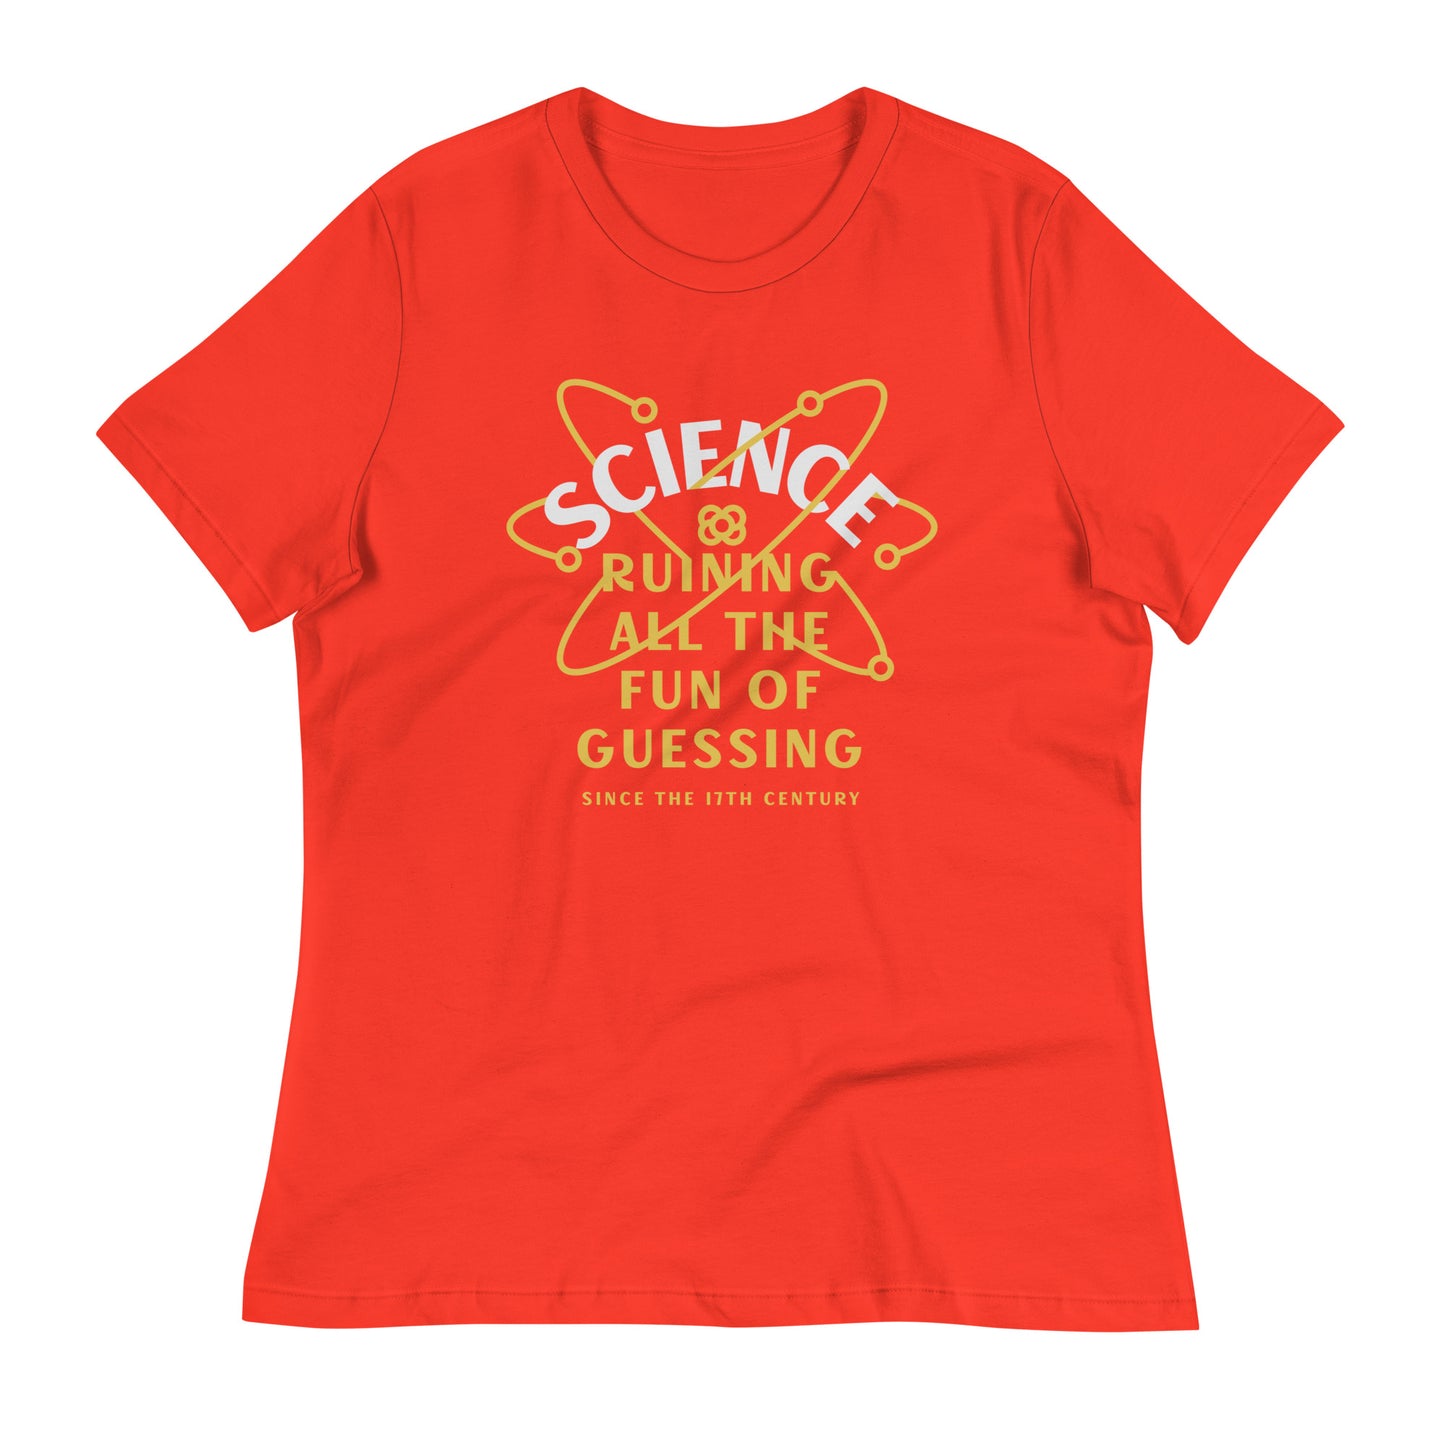 Science Ruining All The Fun Of Guessing Women's Signature Tee